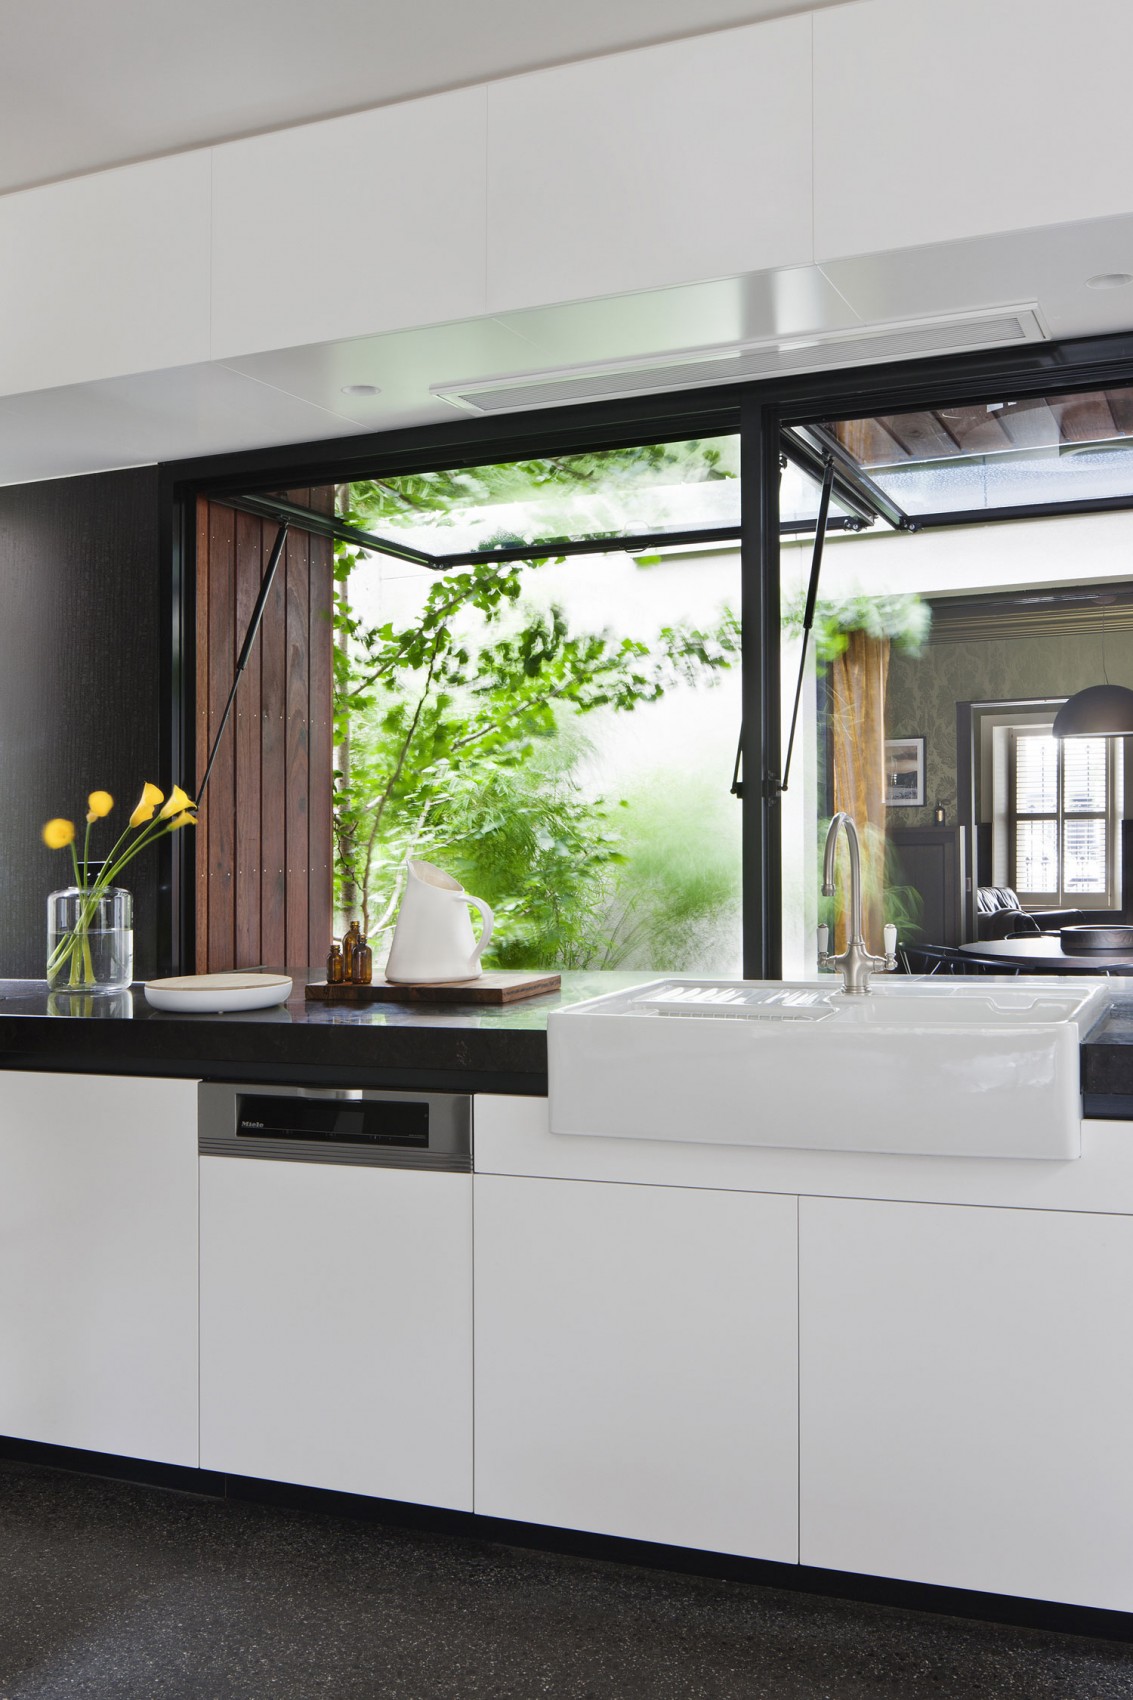 White Kitchen Dark Flashy White Kitchen Cabinet With Dark Marble Countertop Clean Yellow Lily In Glass Vase Nice Fitzroy House Porcelain Sink Dream Homes Bright Contemporary House With Open Plan Living Room Spaces